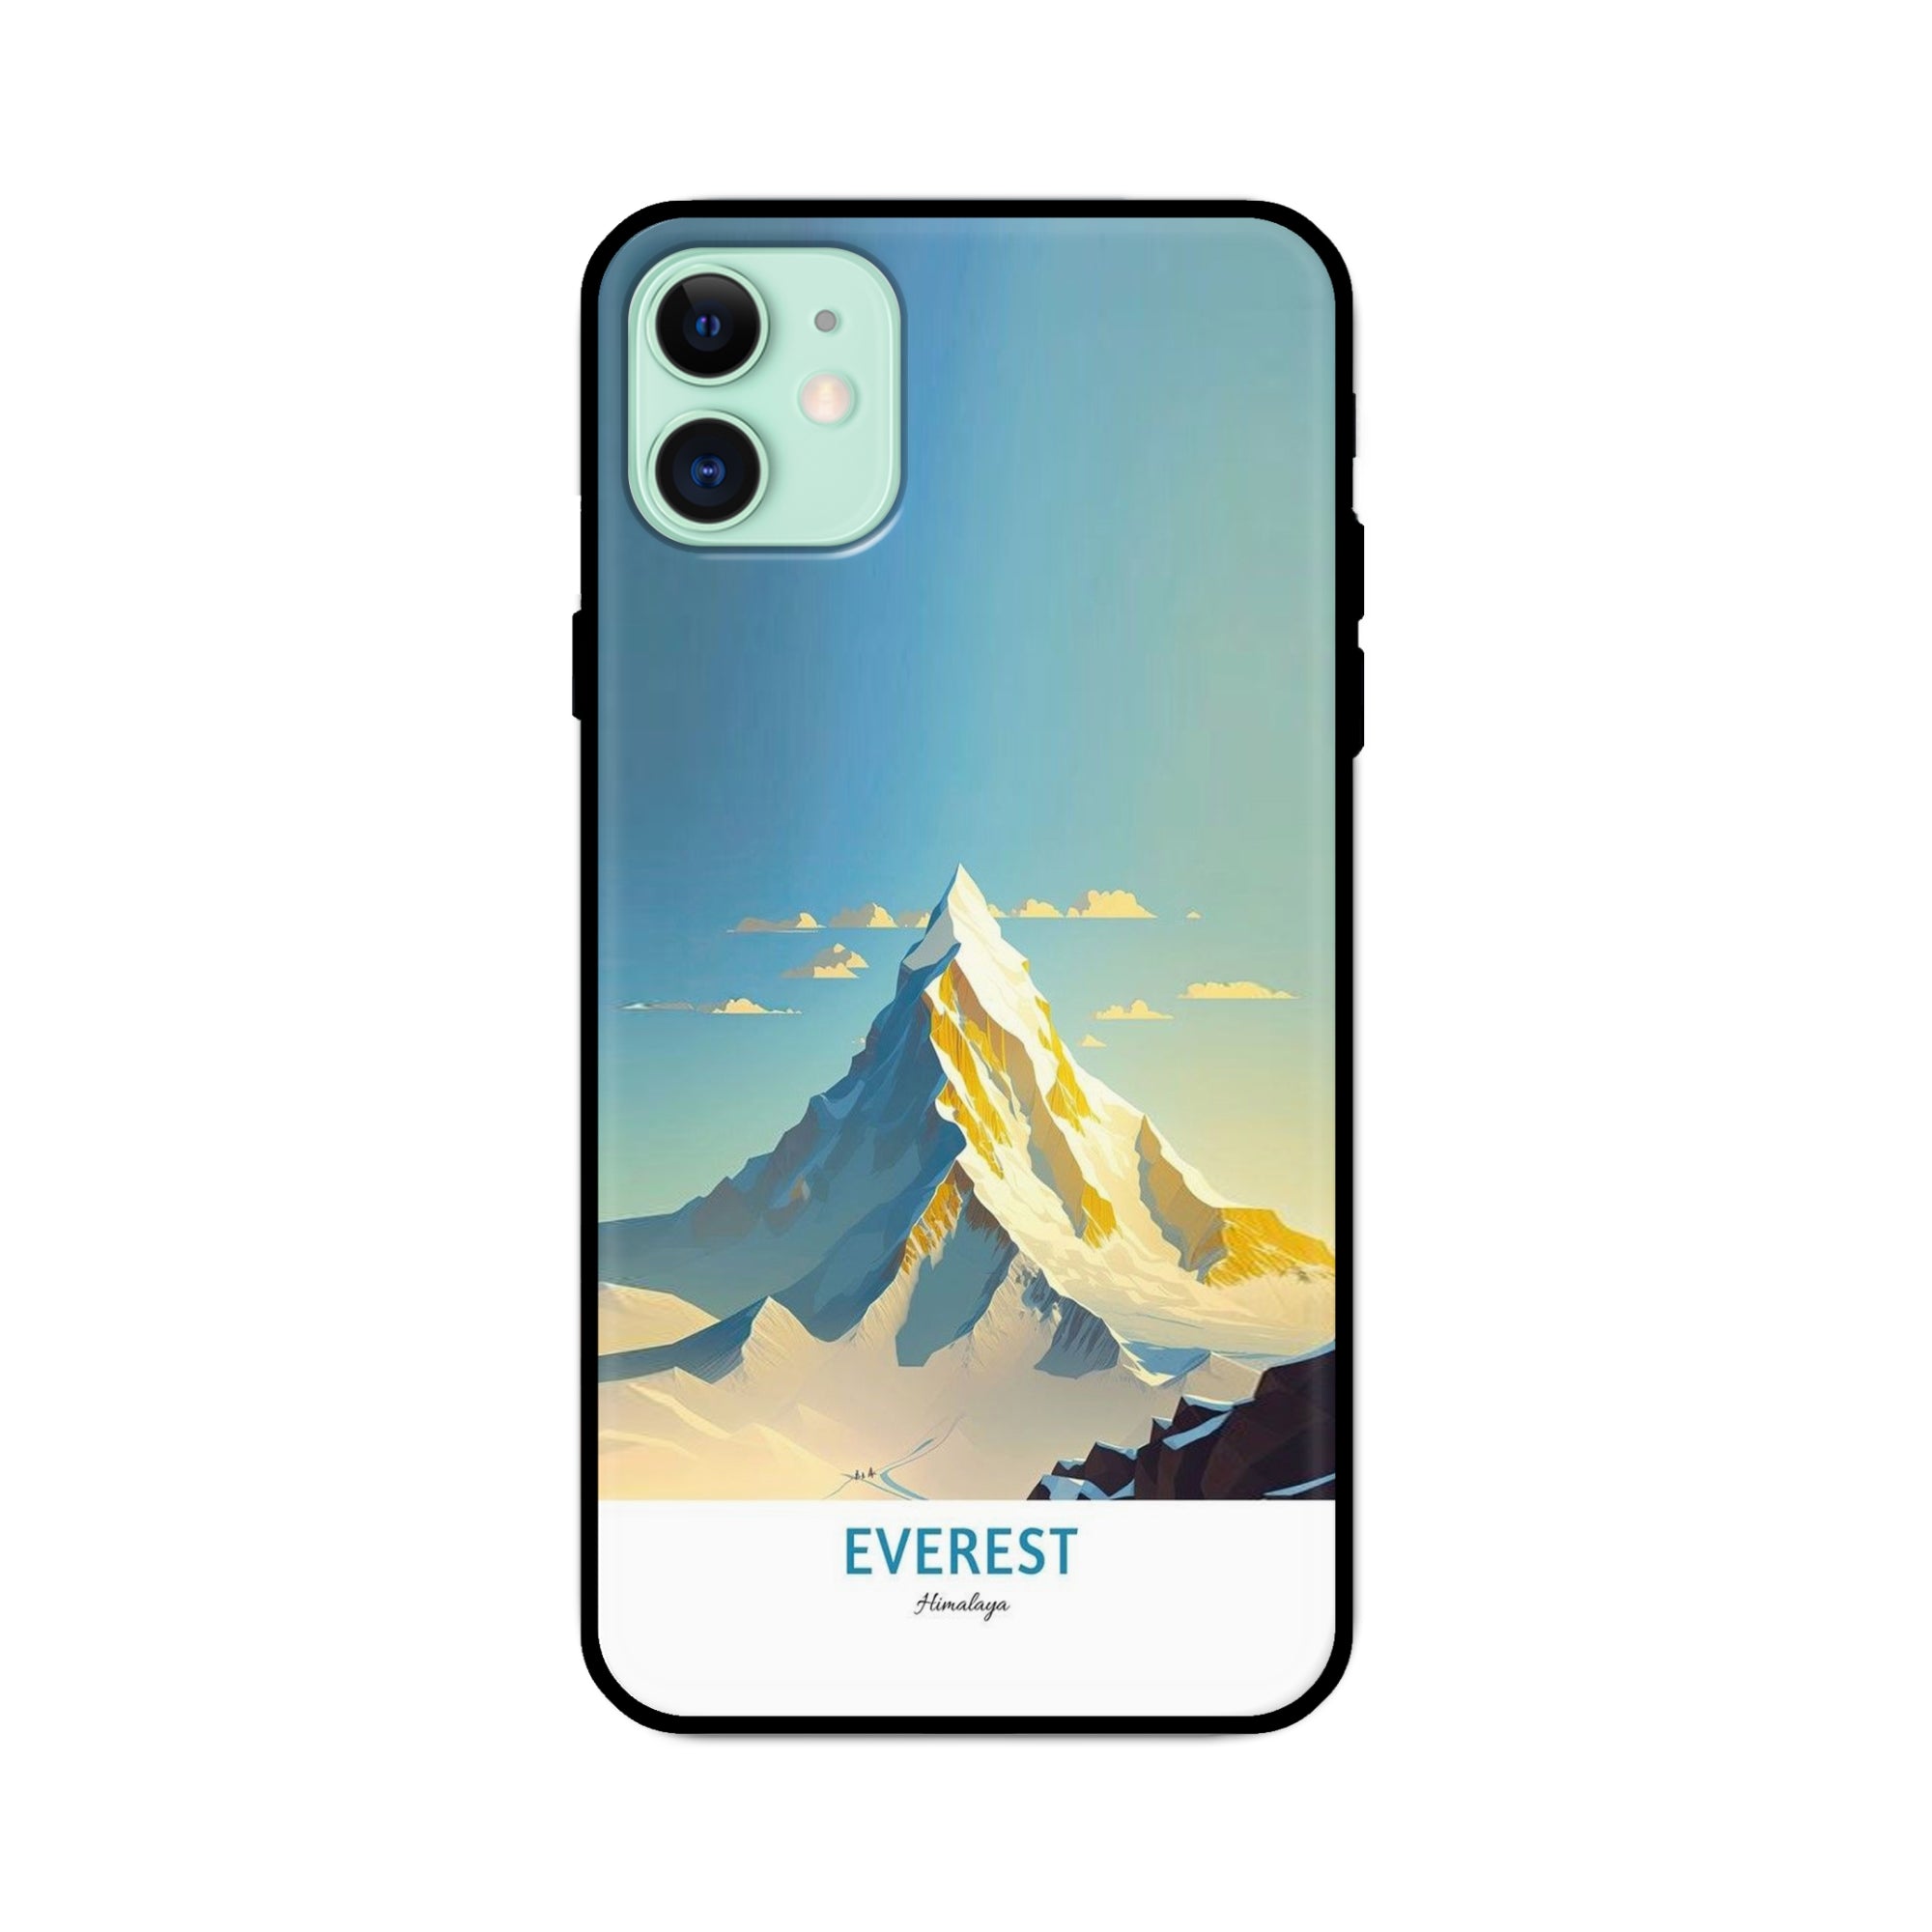 Buy Everest Glass/Metal Back Mobile Phone Case/Cover For iPhone 11 Online